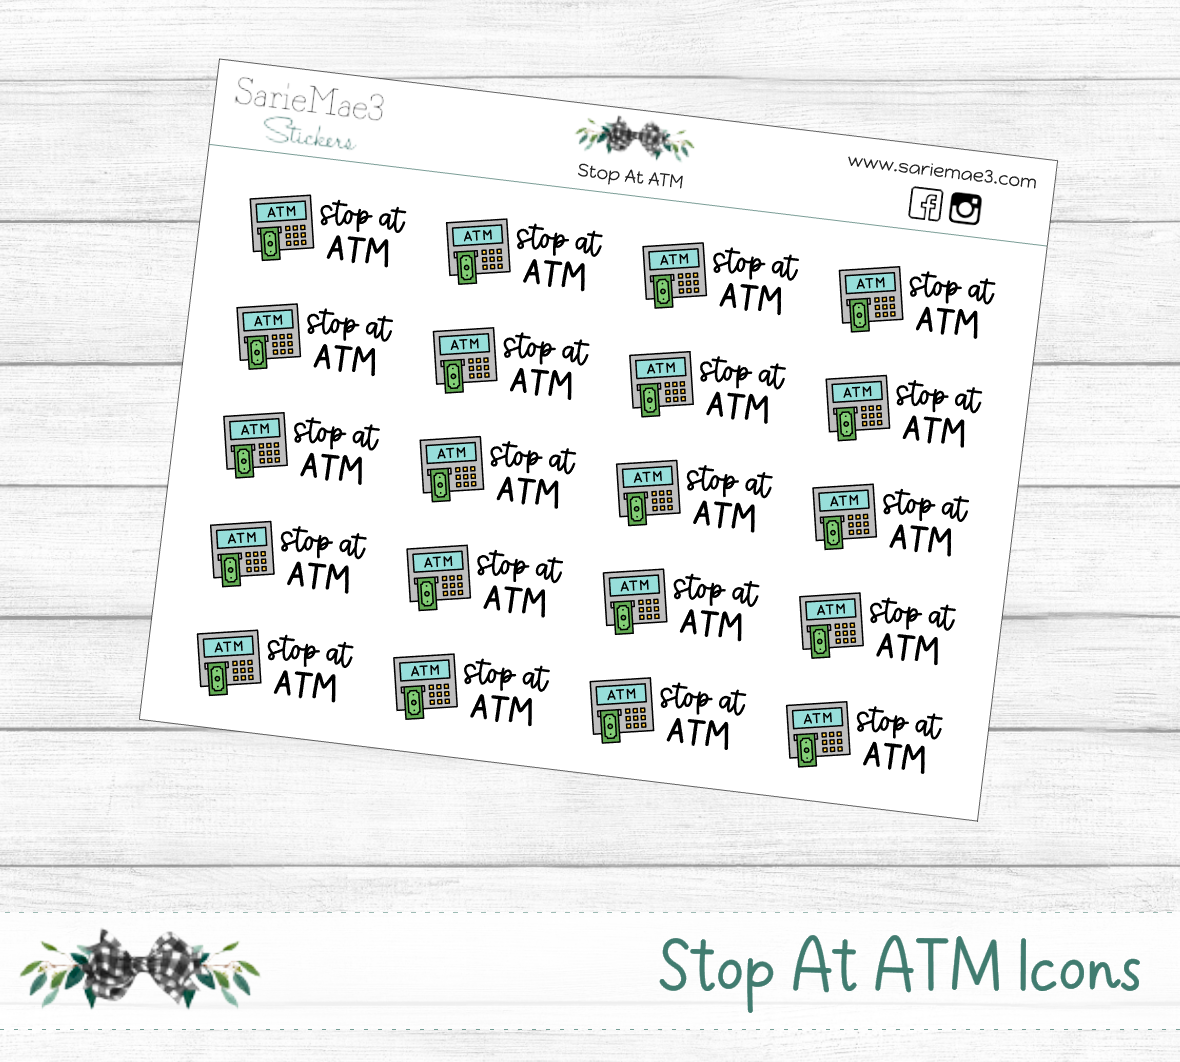 Stop At ATM Icons